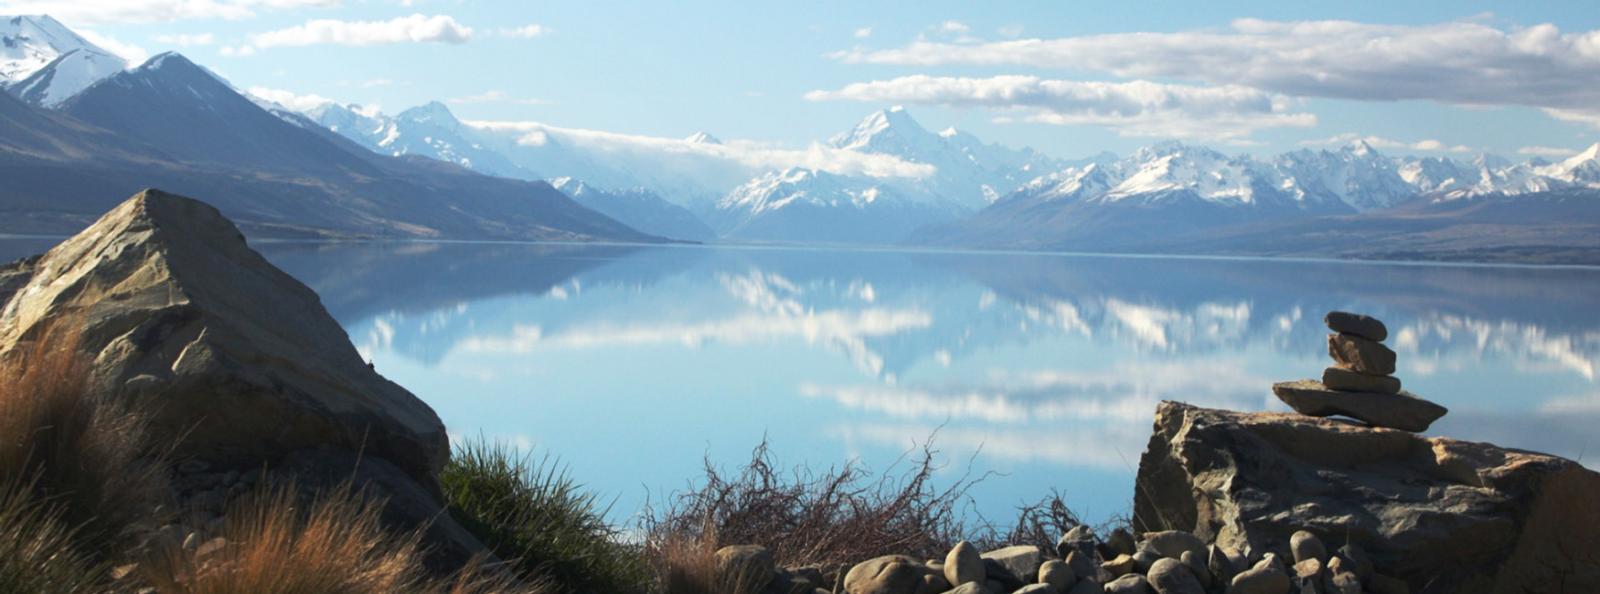 1-7 Day New Zealand Itineraries